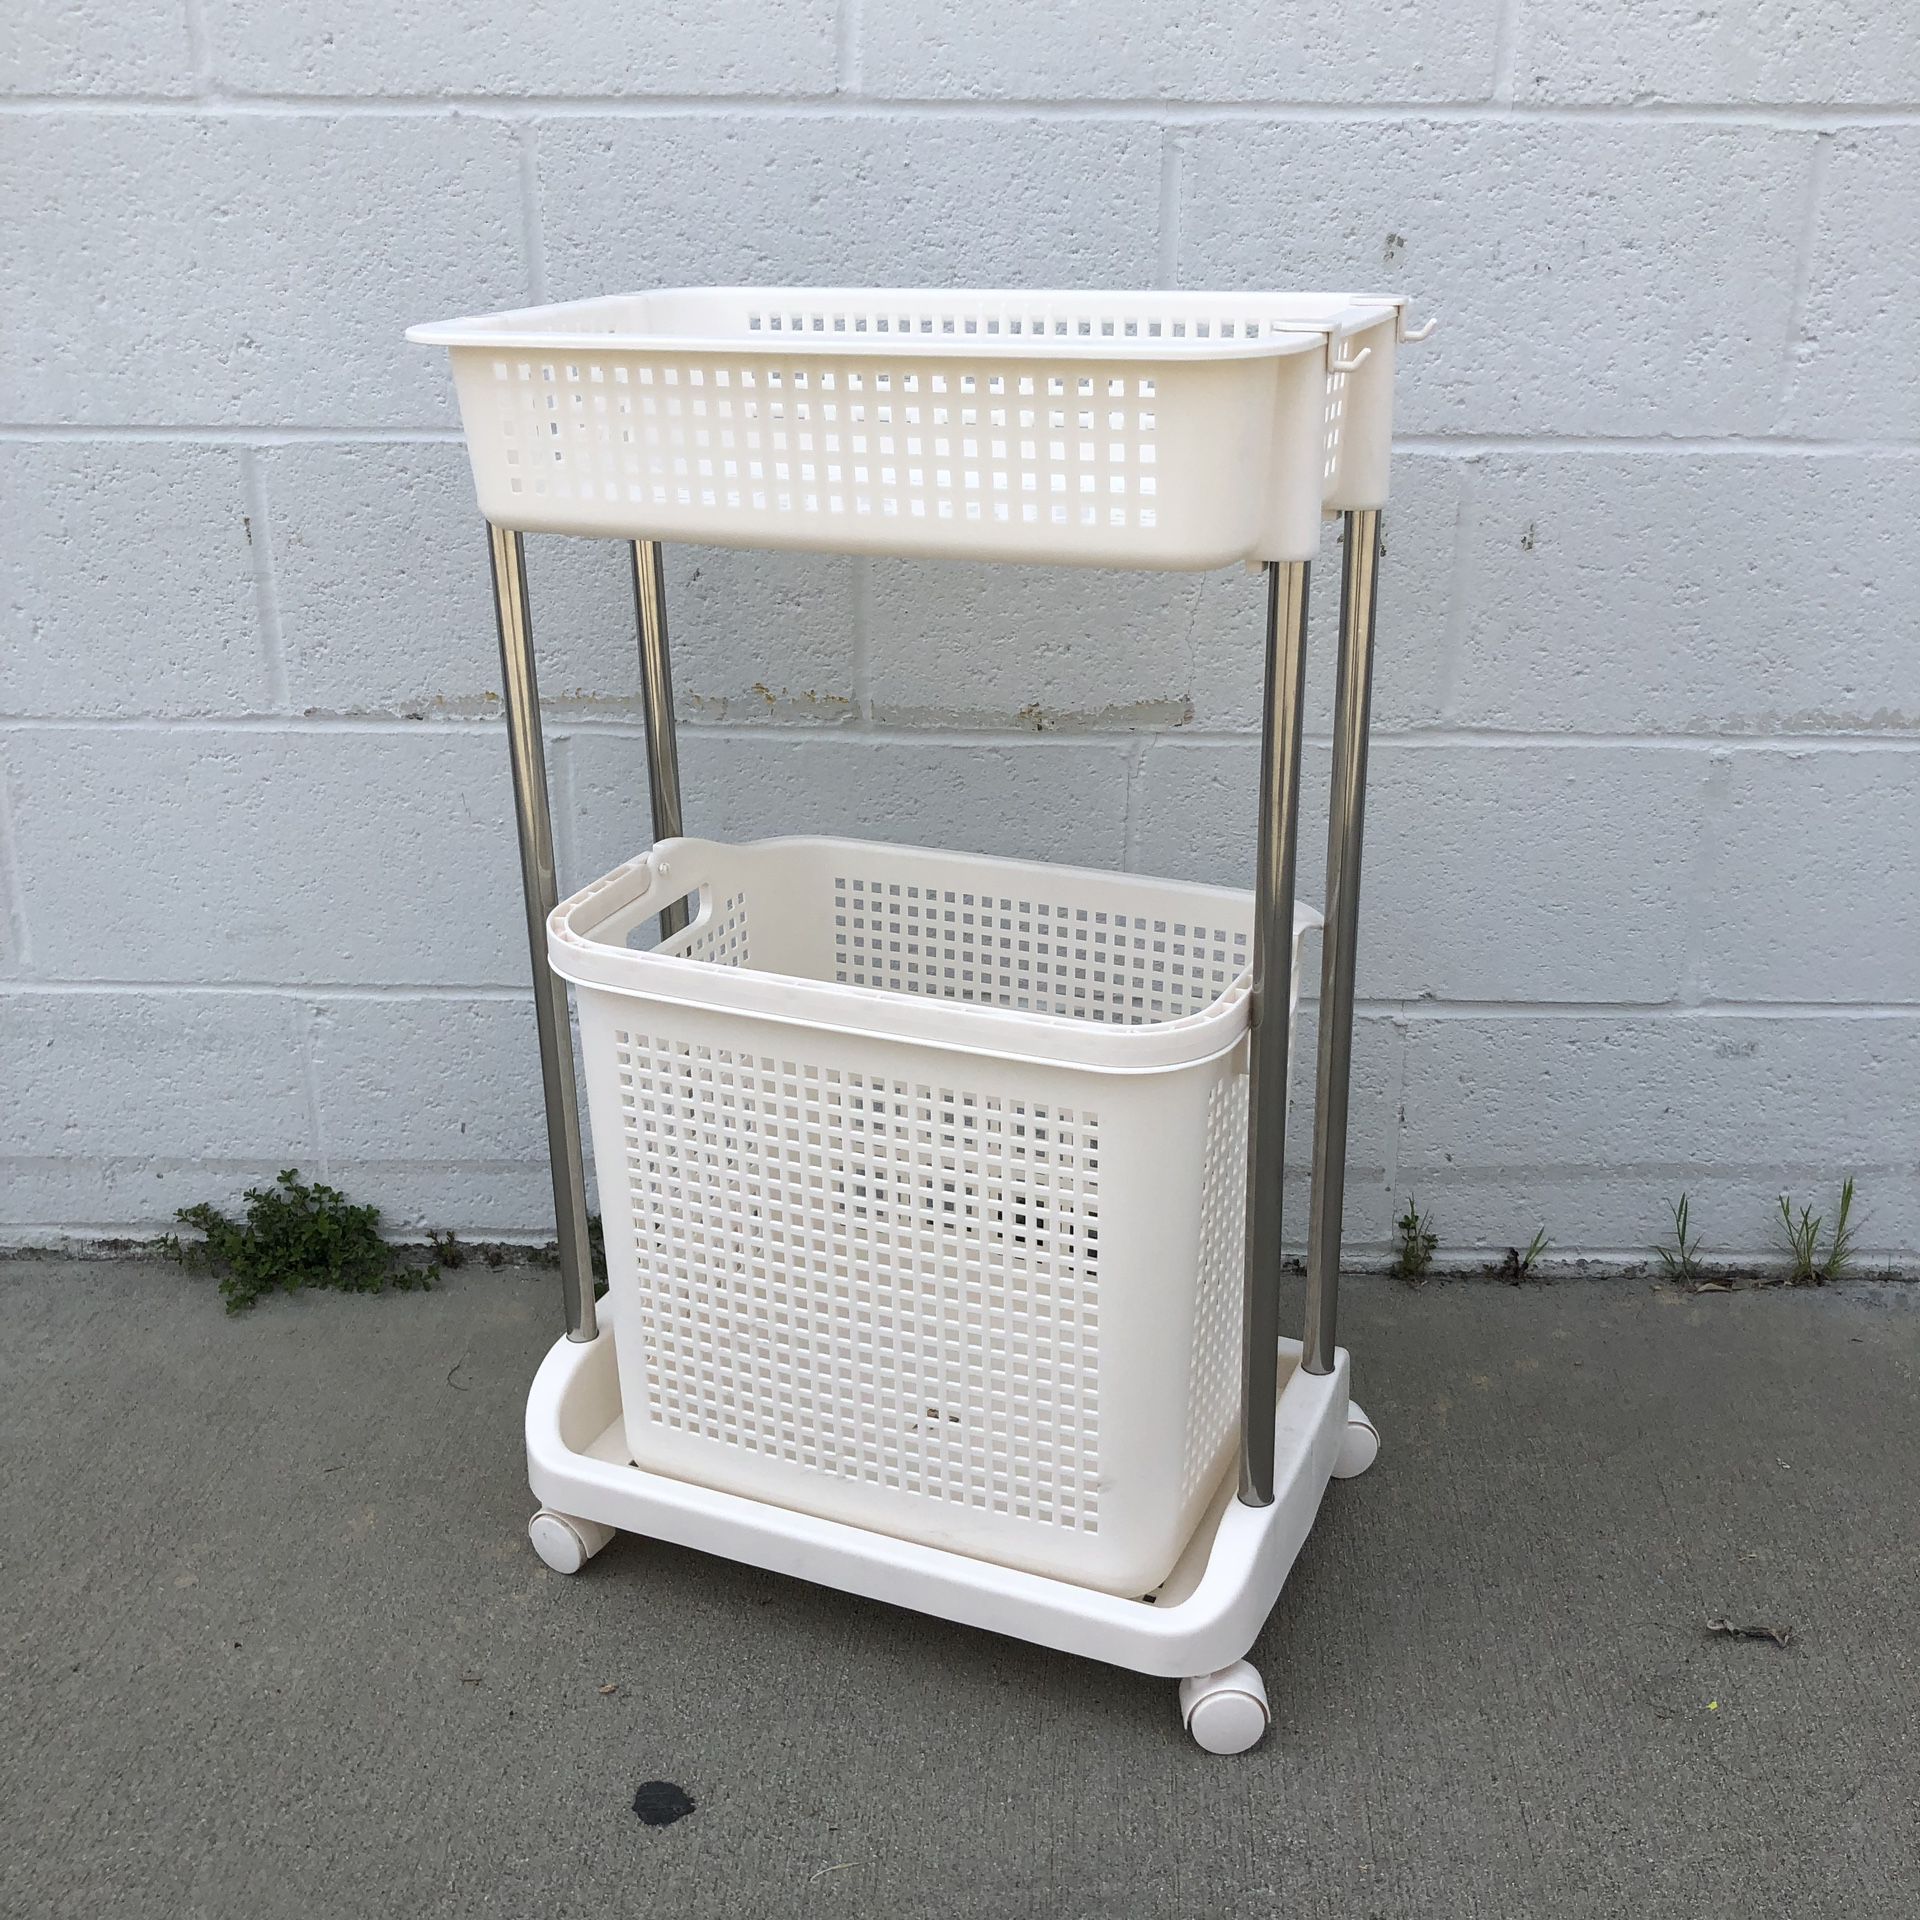 New White Laundry Rolling Cart Stainless Steel With Basket Bathroom Storage Rack For Home Bathroom